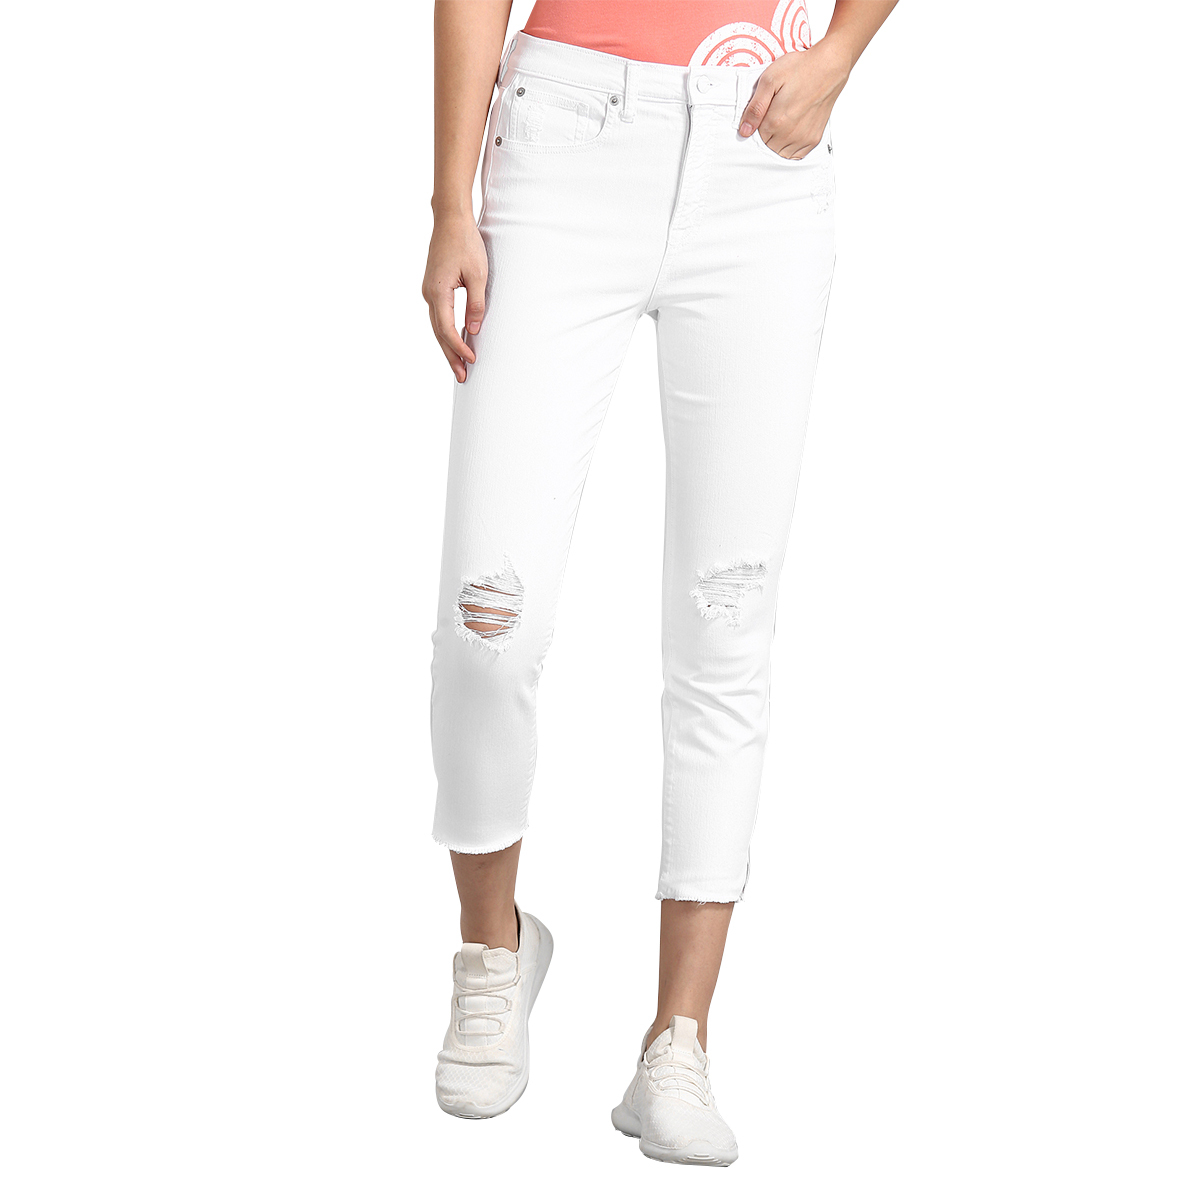 Gap High Rise Skinny Fit Sold Color Jeans Styled with Heavy Distress & Raw Hems - White